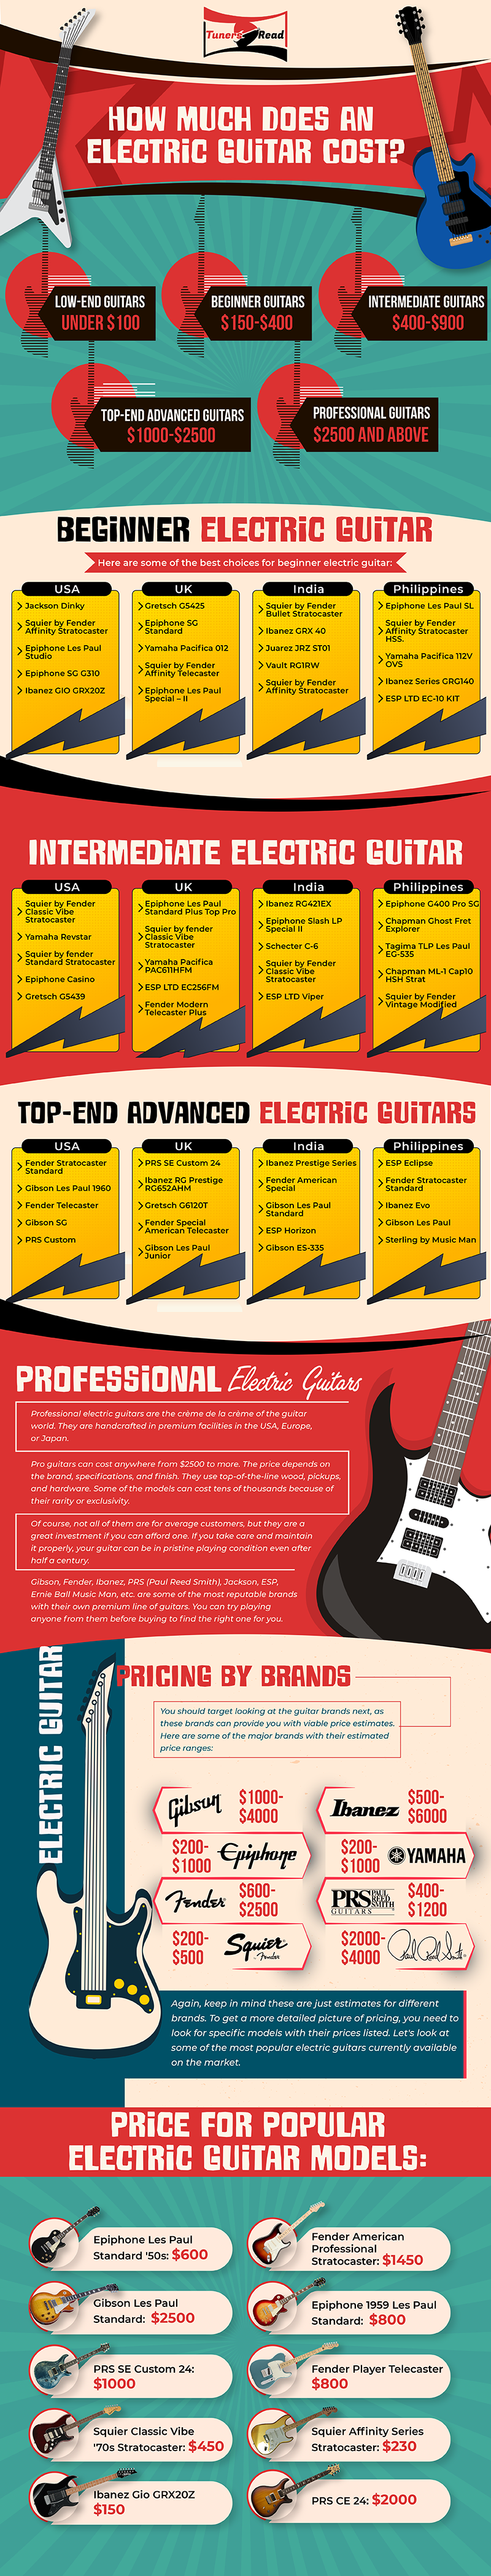 electric guitar cost infographic